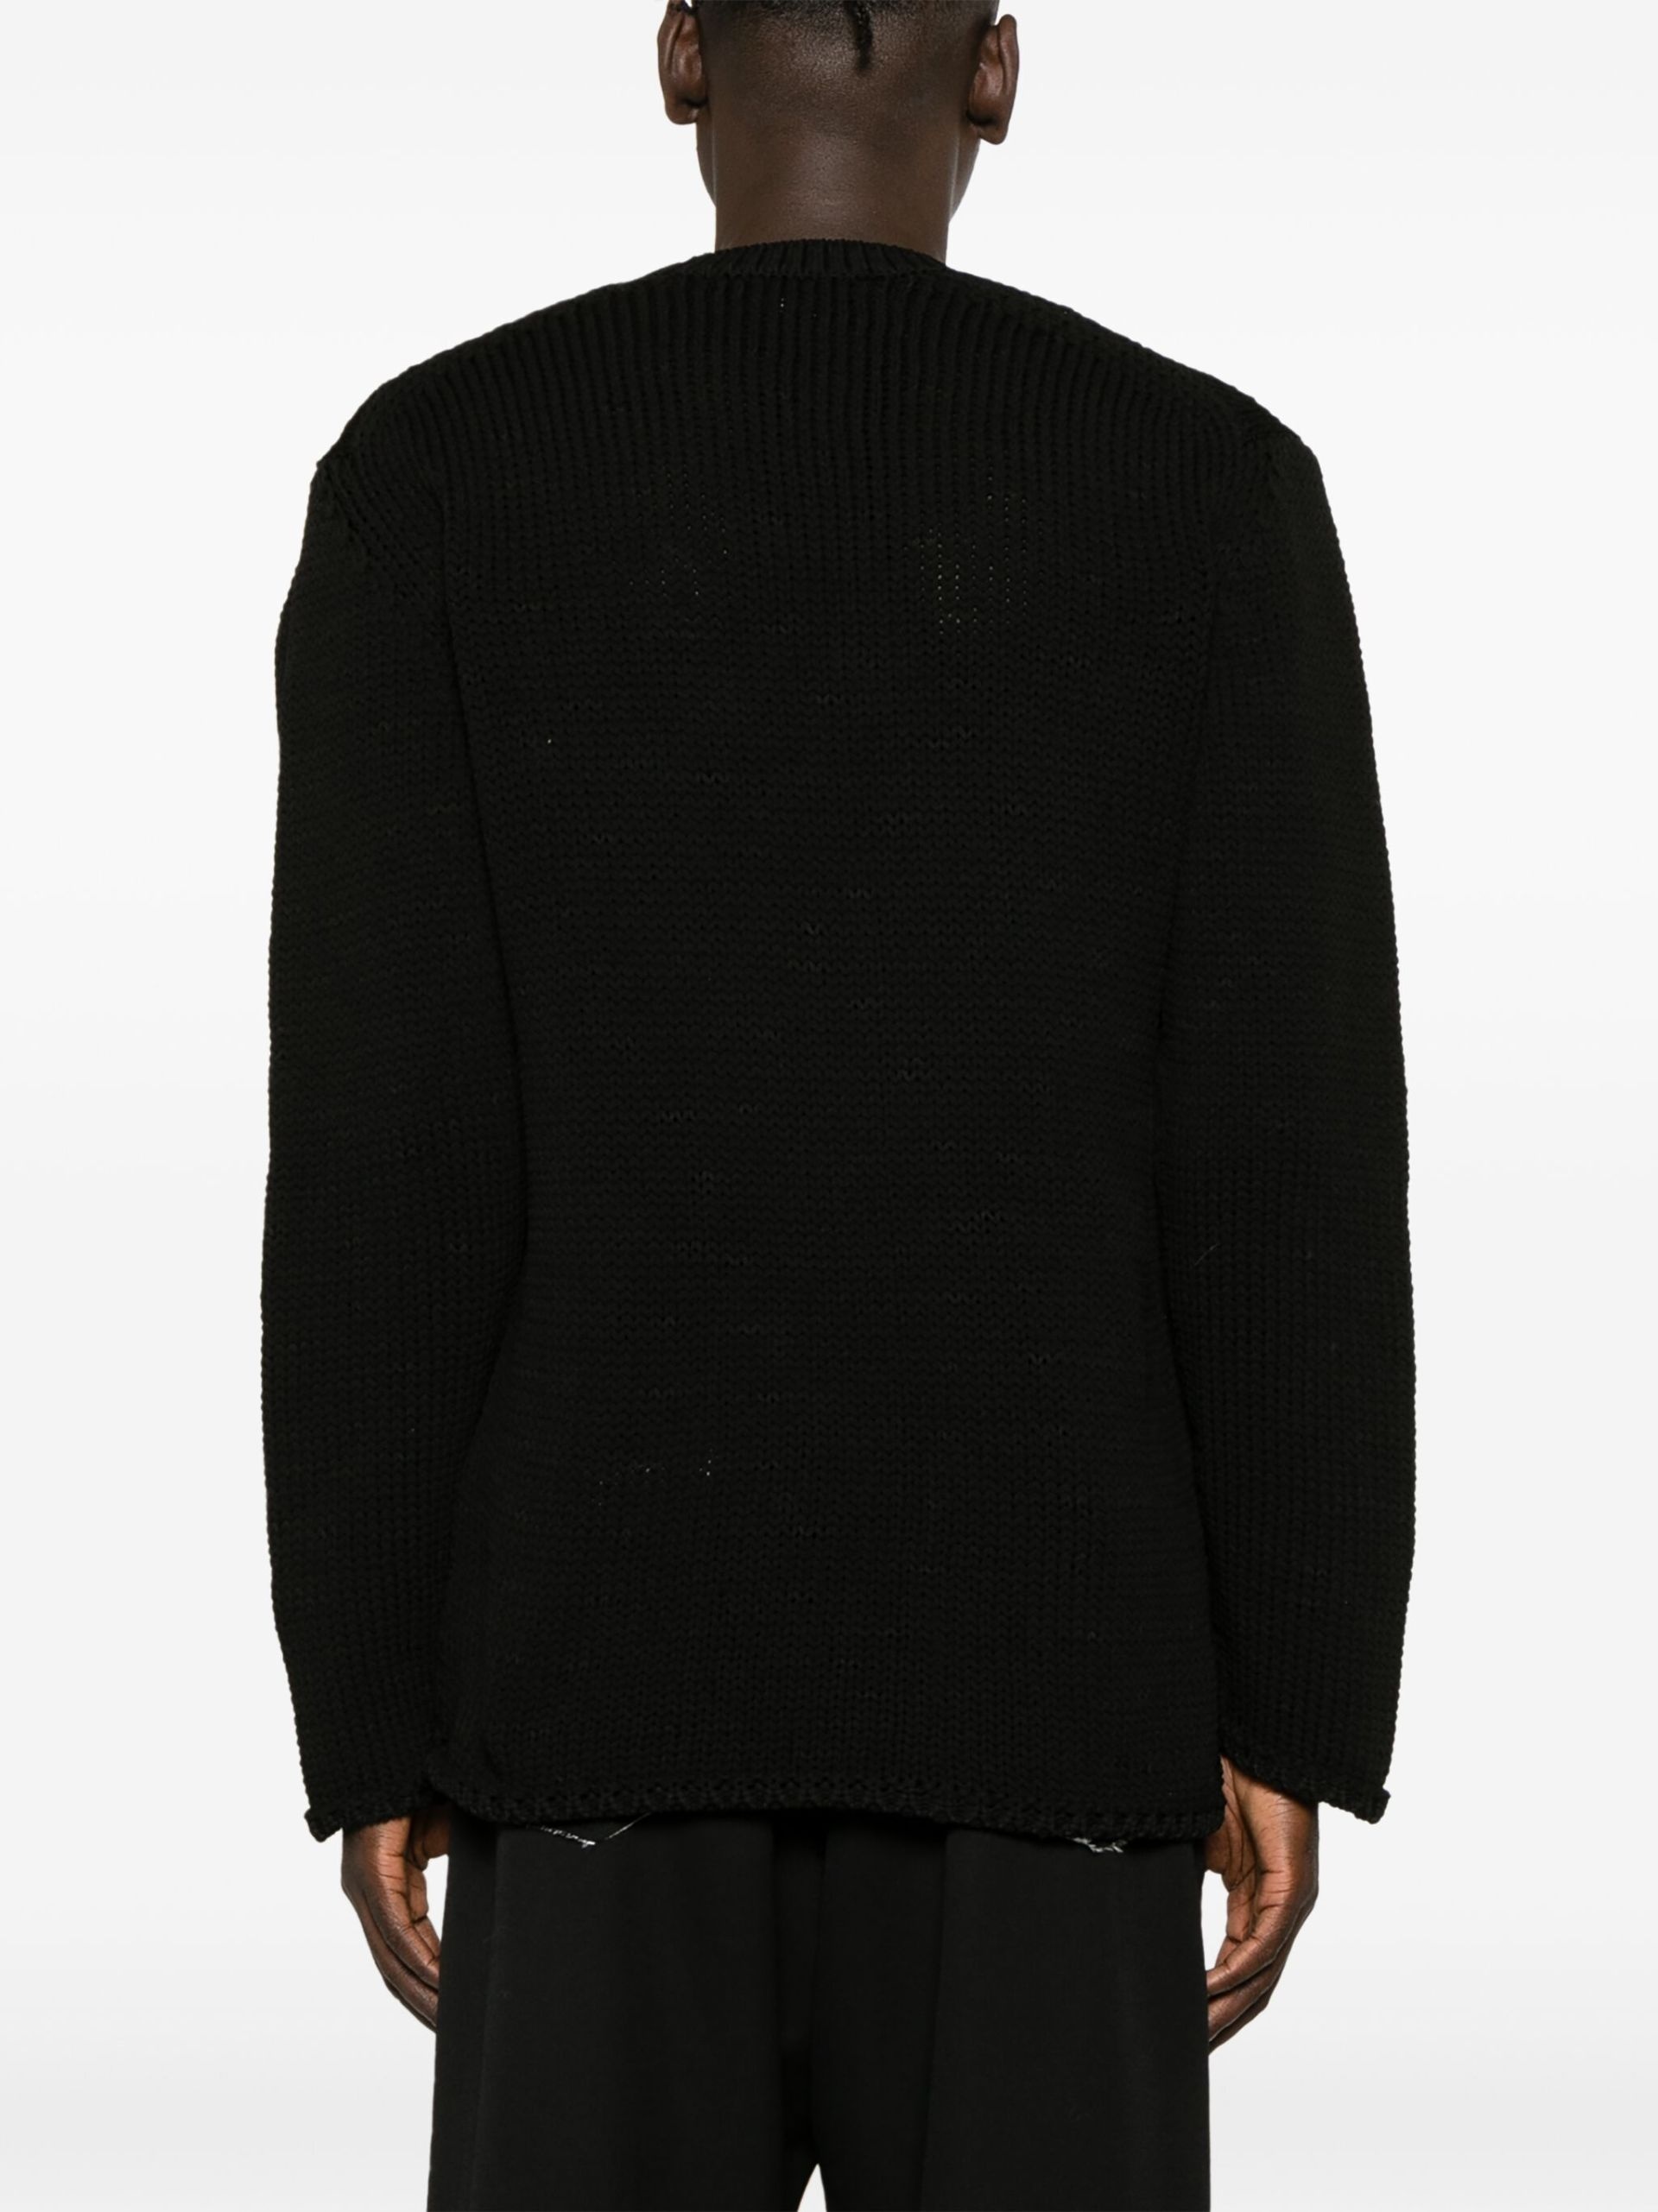 Black Cable-Knit Crew-Neck Sweater - 4